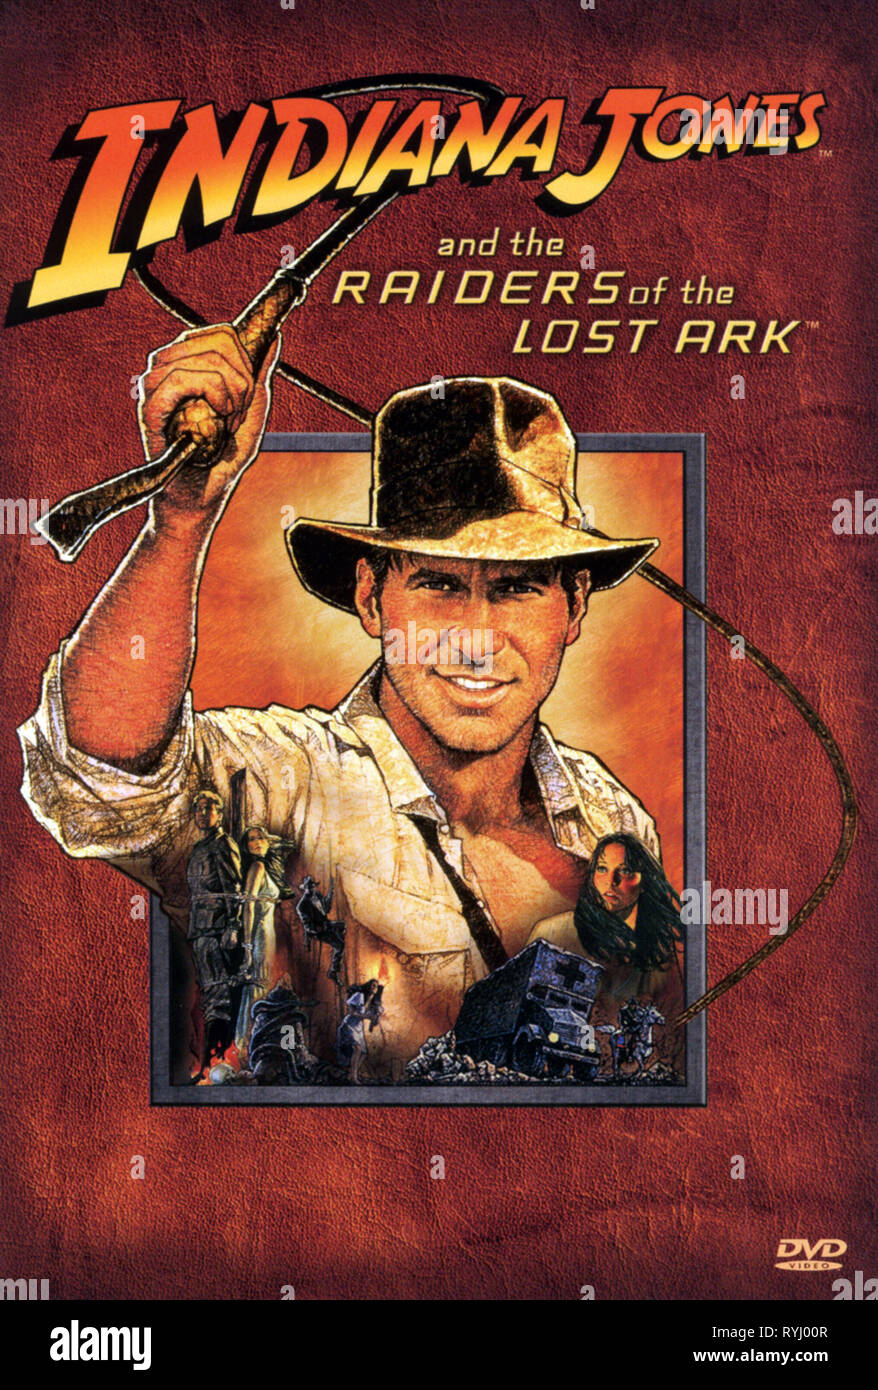 https://c8.alamy.com/comp/RYJ00R/harrison-ford-dvd-cover-indiana-jones-and-the-raiders-of-the-lost-ark-1981-RYJ00R.jpg